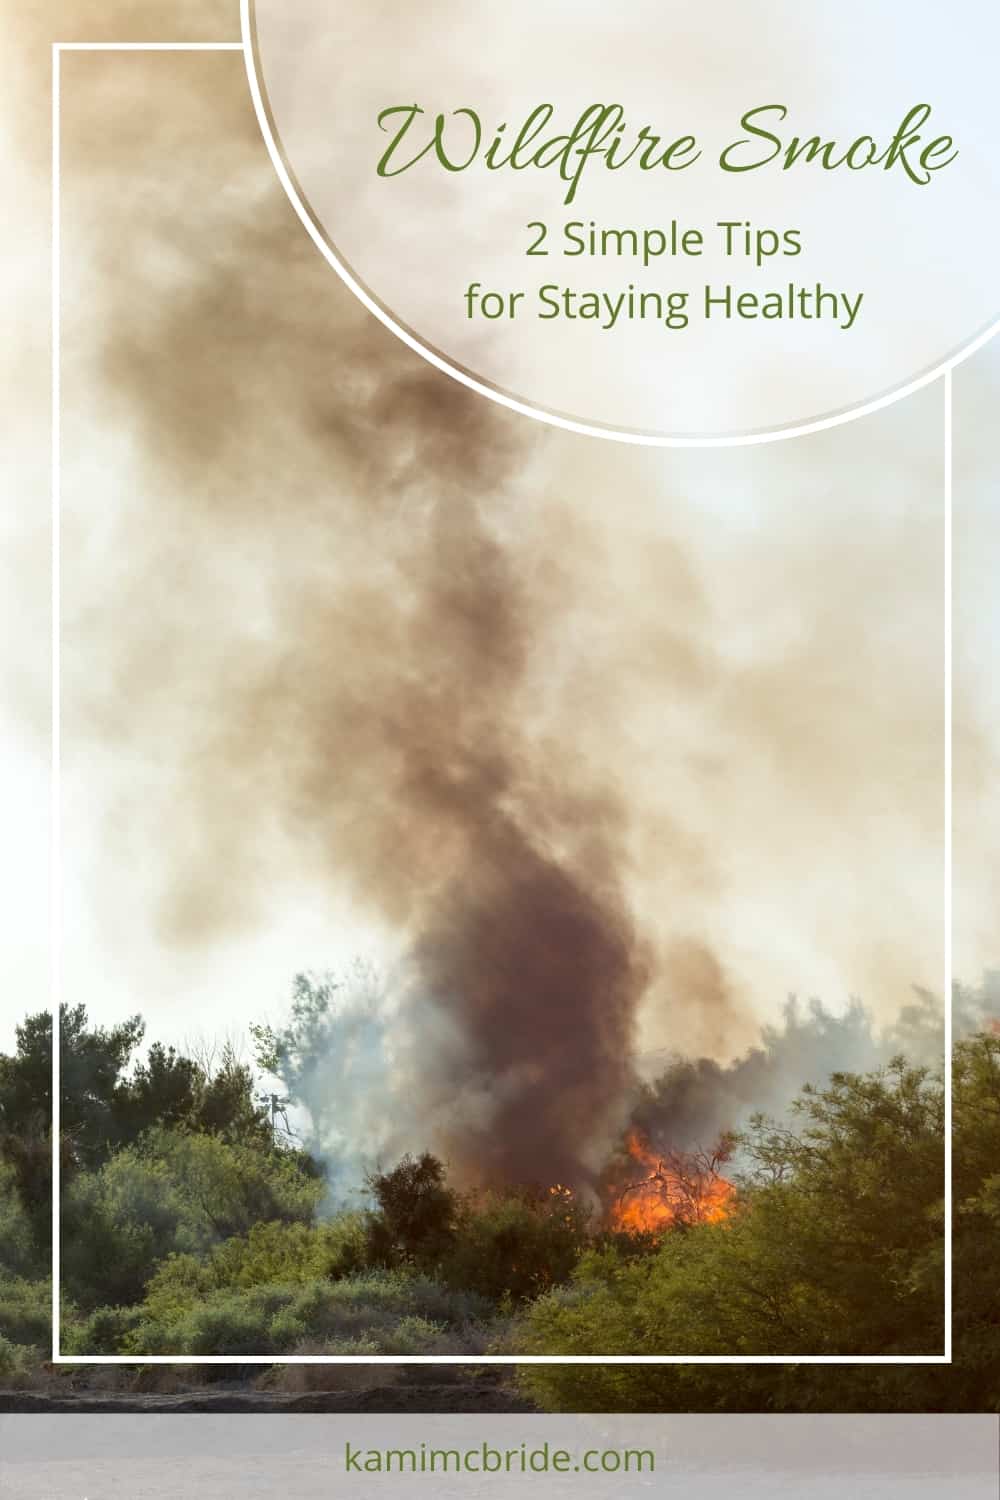 Wildfire Smoke: Tips for Staying Healthy